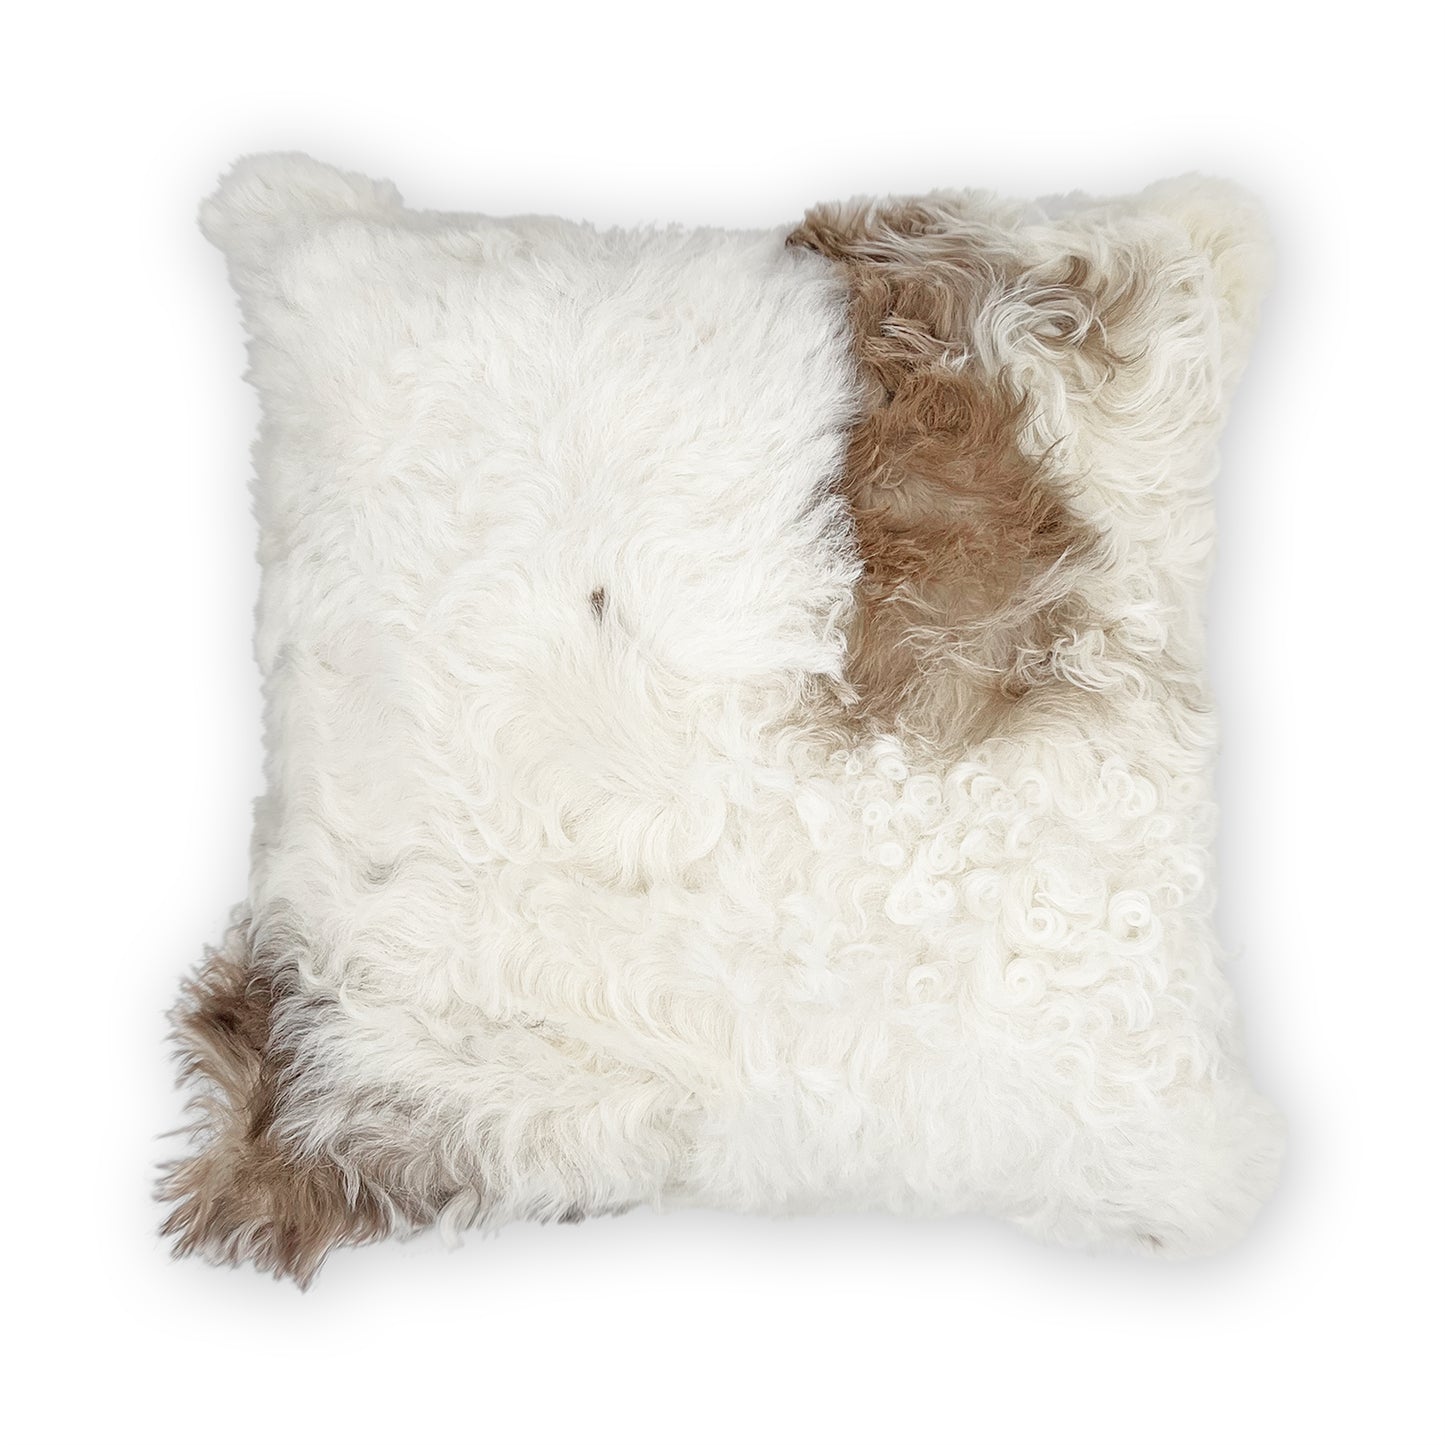 The Mood Tigrado Spanish Lambskin Patchwork Pillow, 18x18 in., Spotted Ivory